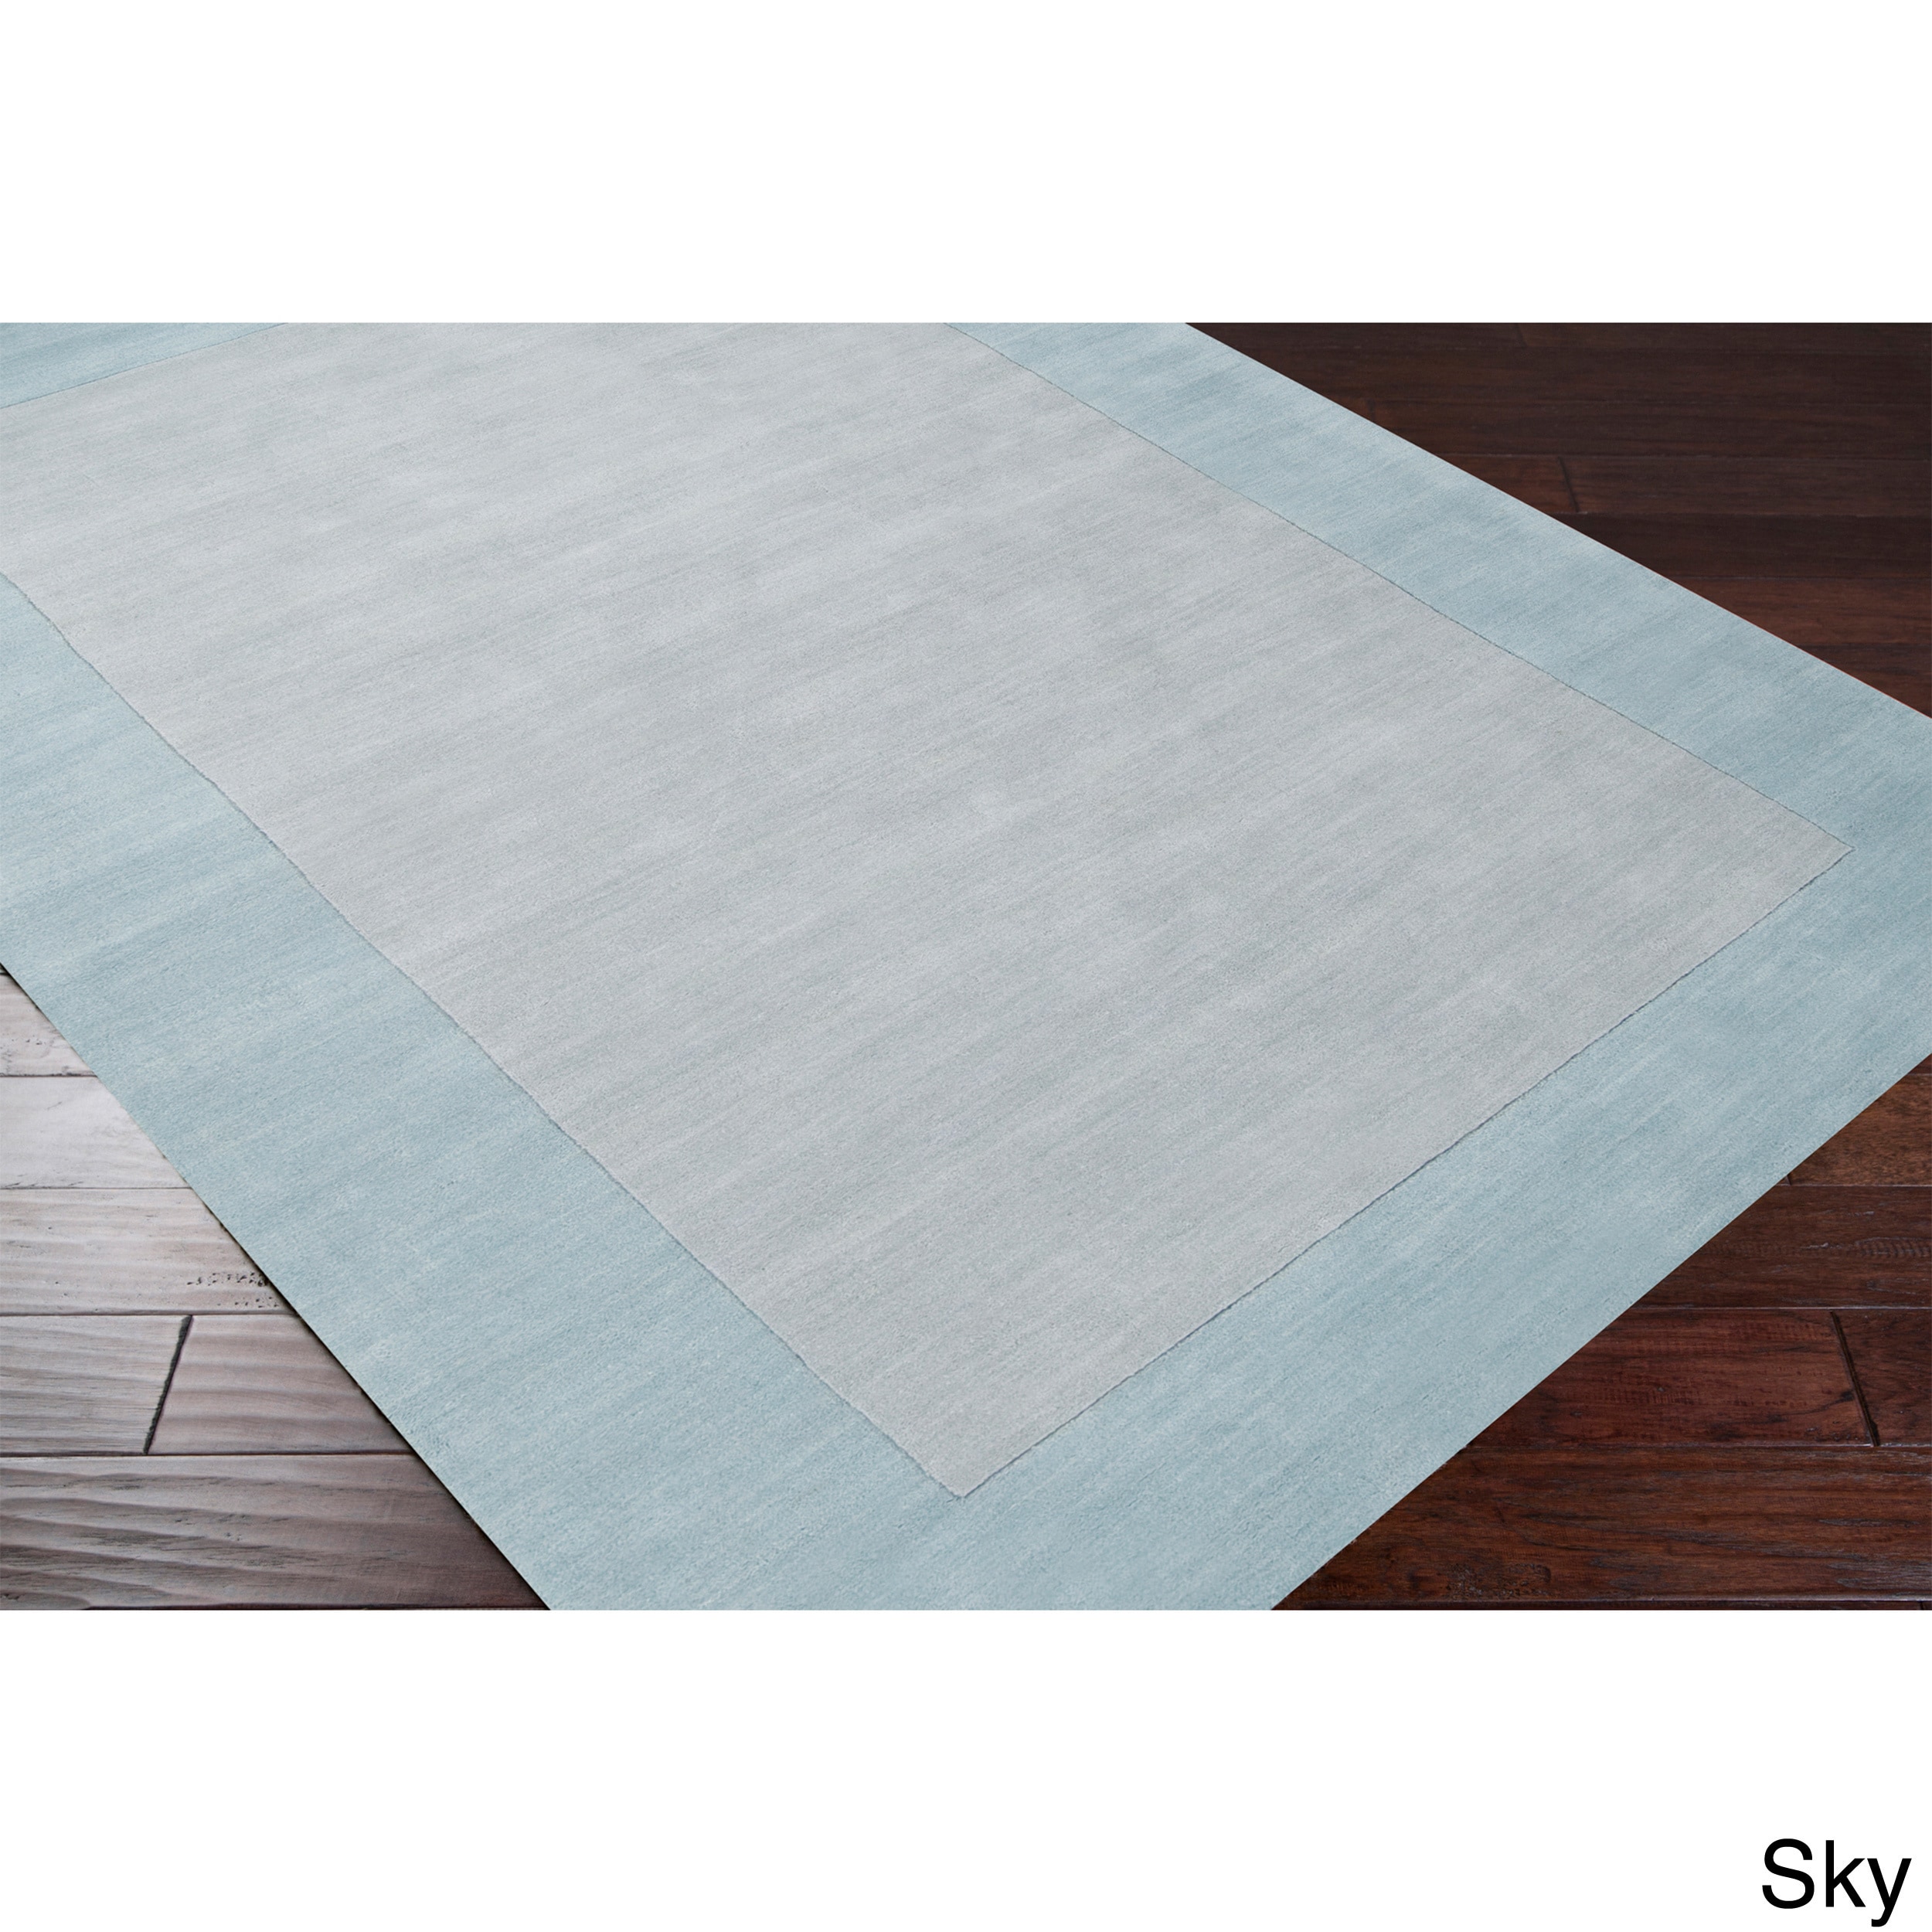 Surya Carpet, Inc Hand Loomed Obert Solid Bordered Tone on tone Wool Area Rug (9 X 13) Blue Size 9 x 13